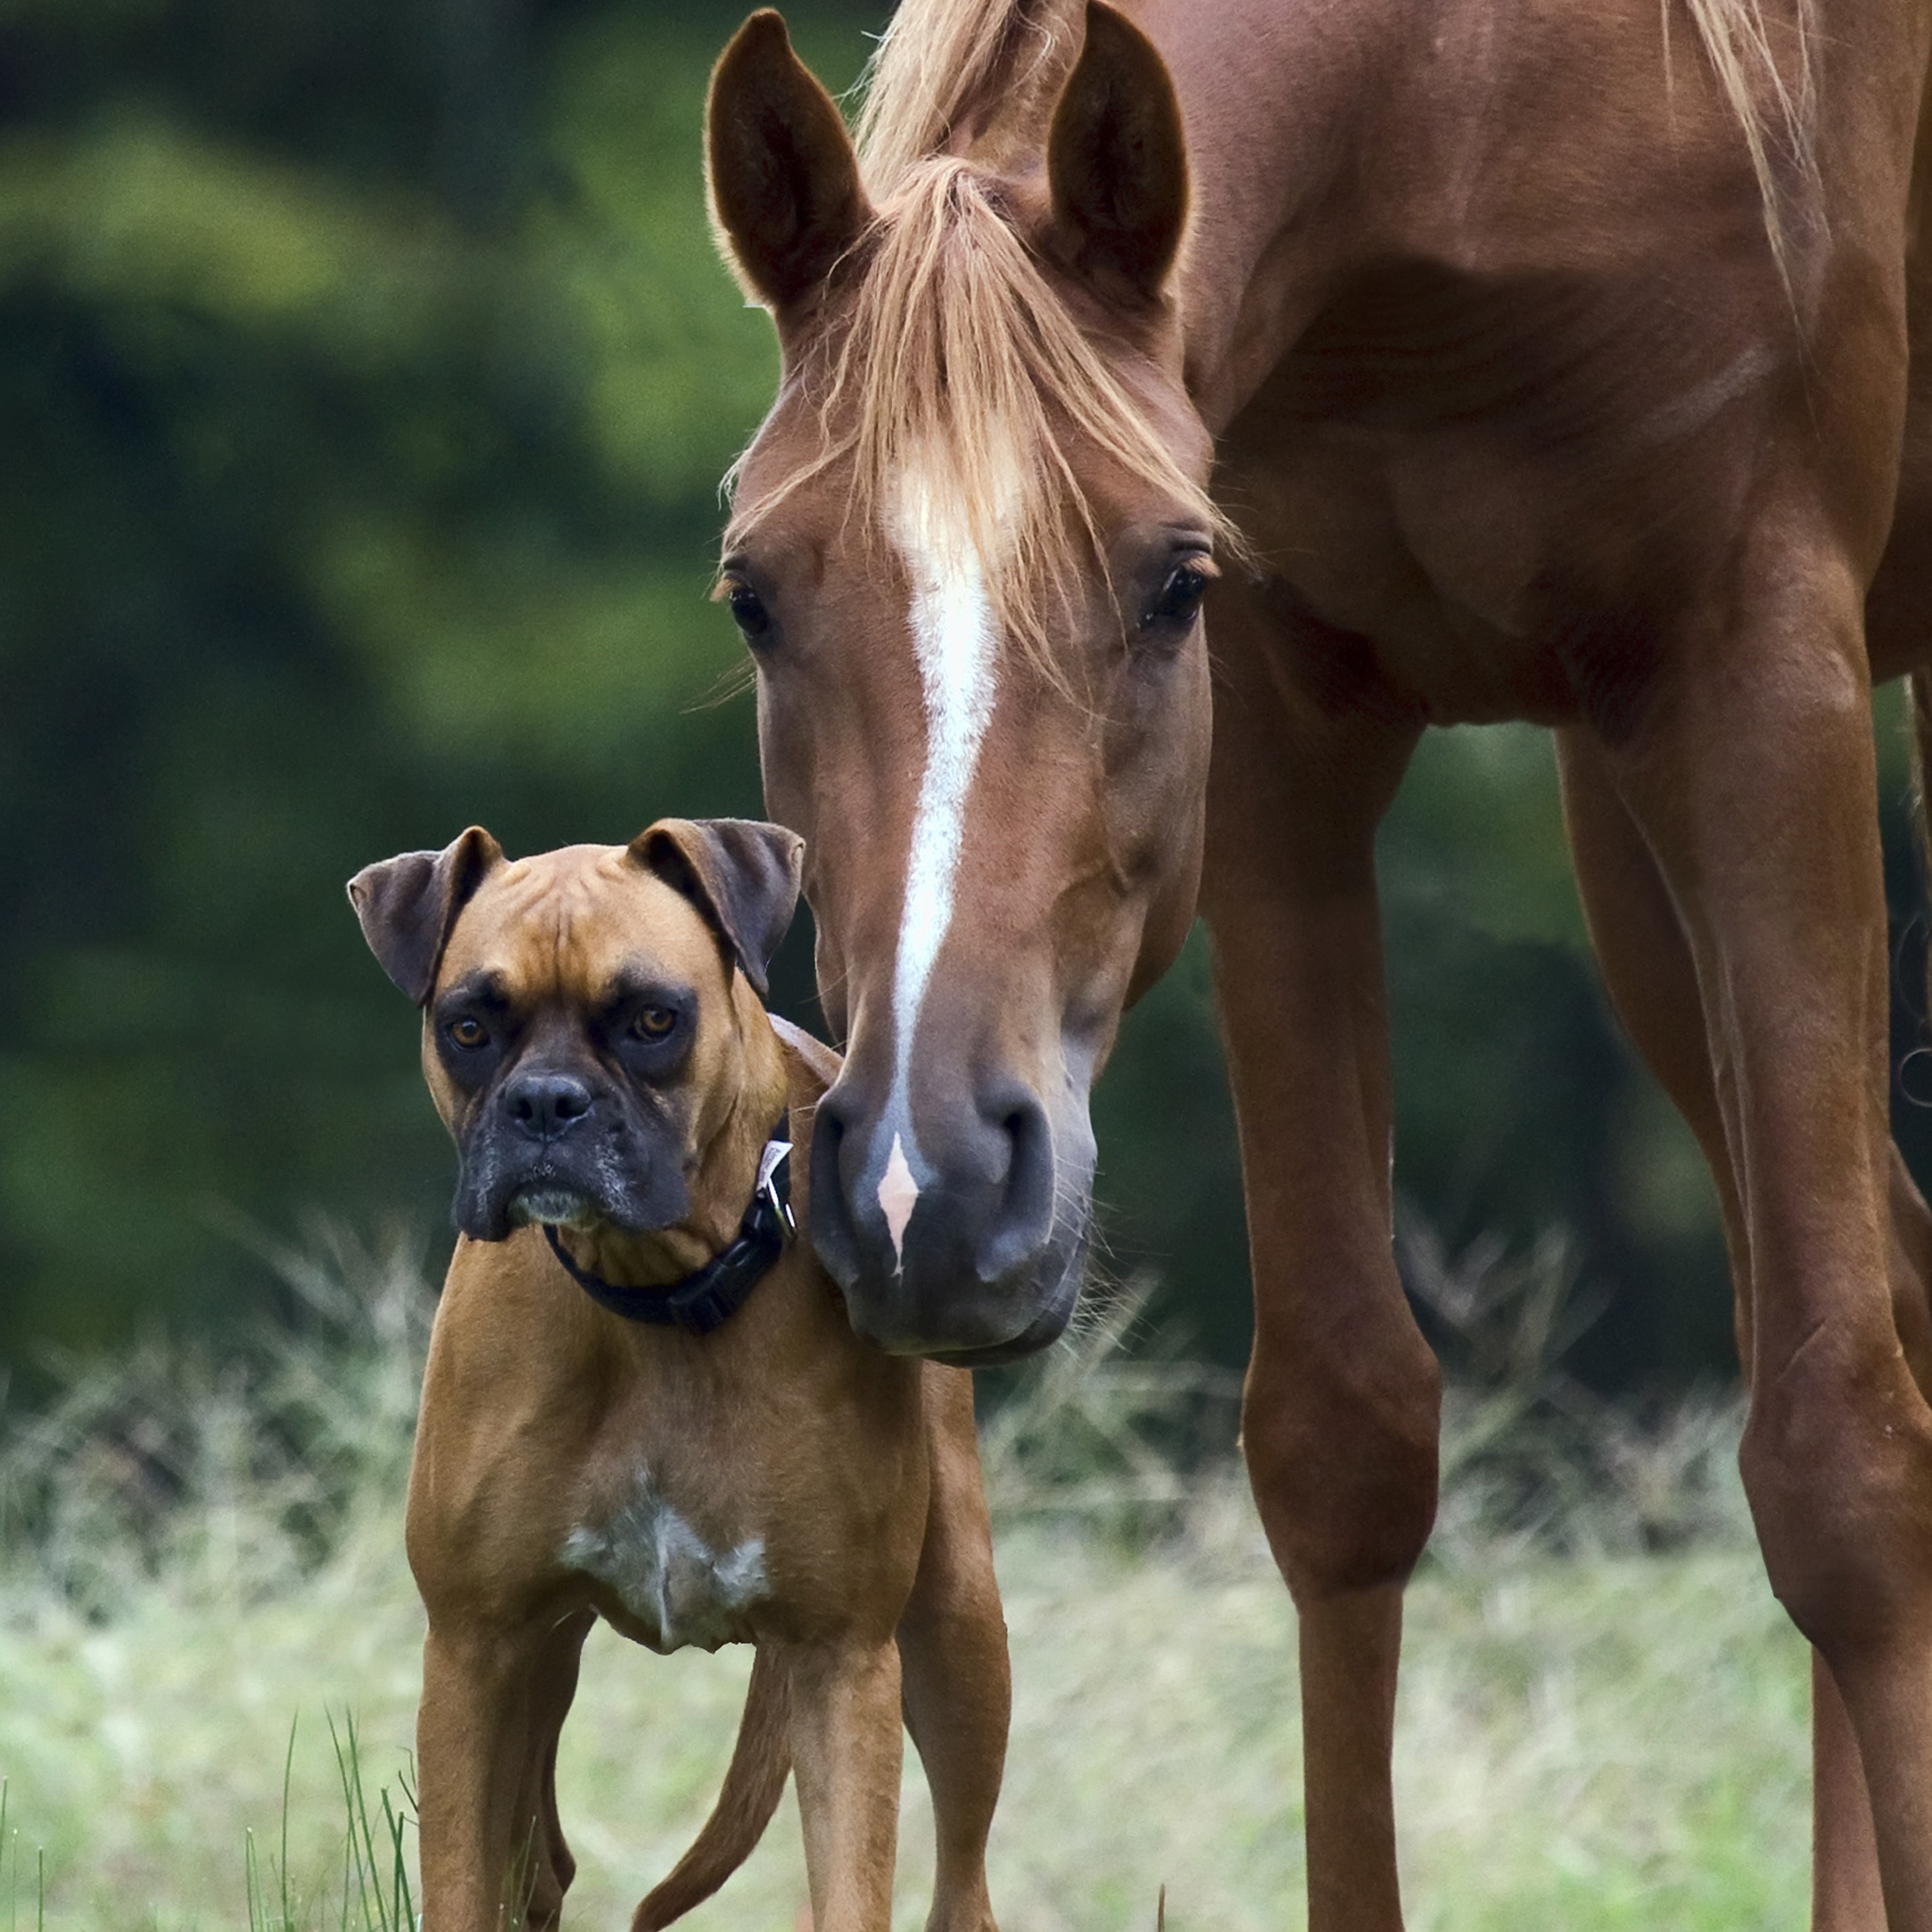 brown boxer dog and brown horse standing together in a field looking at the camera